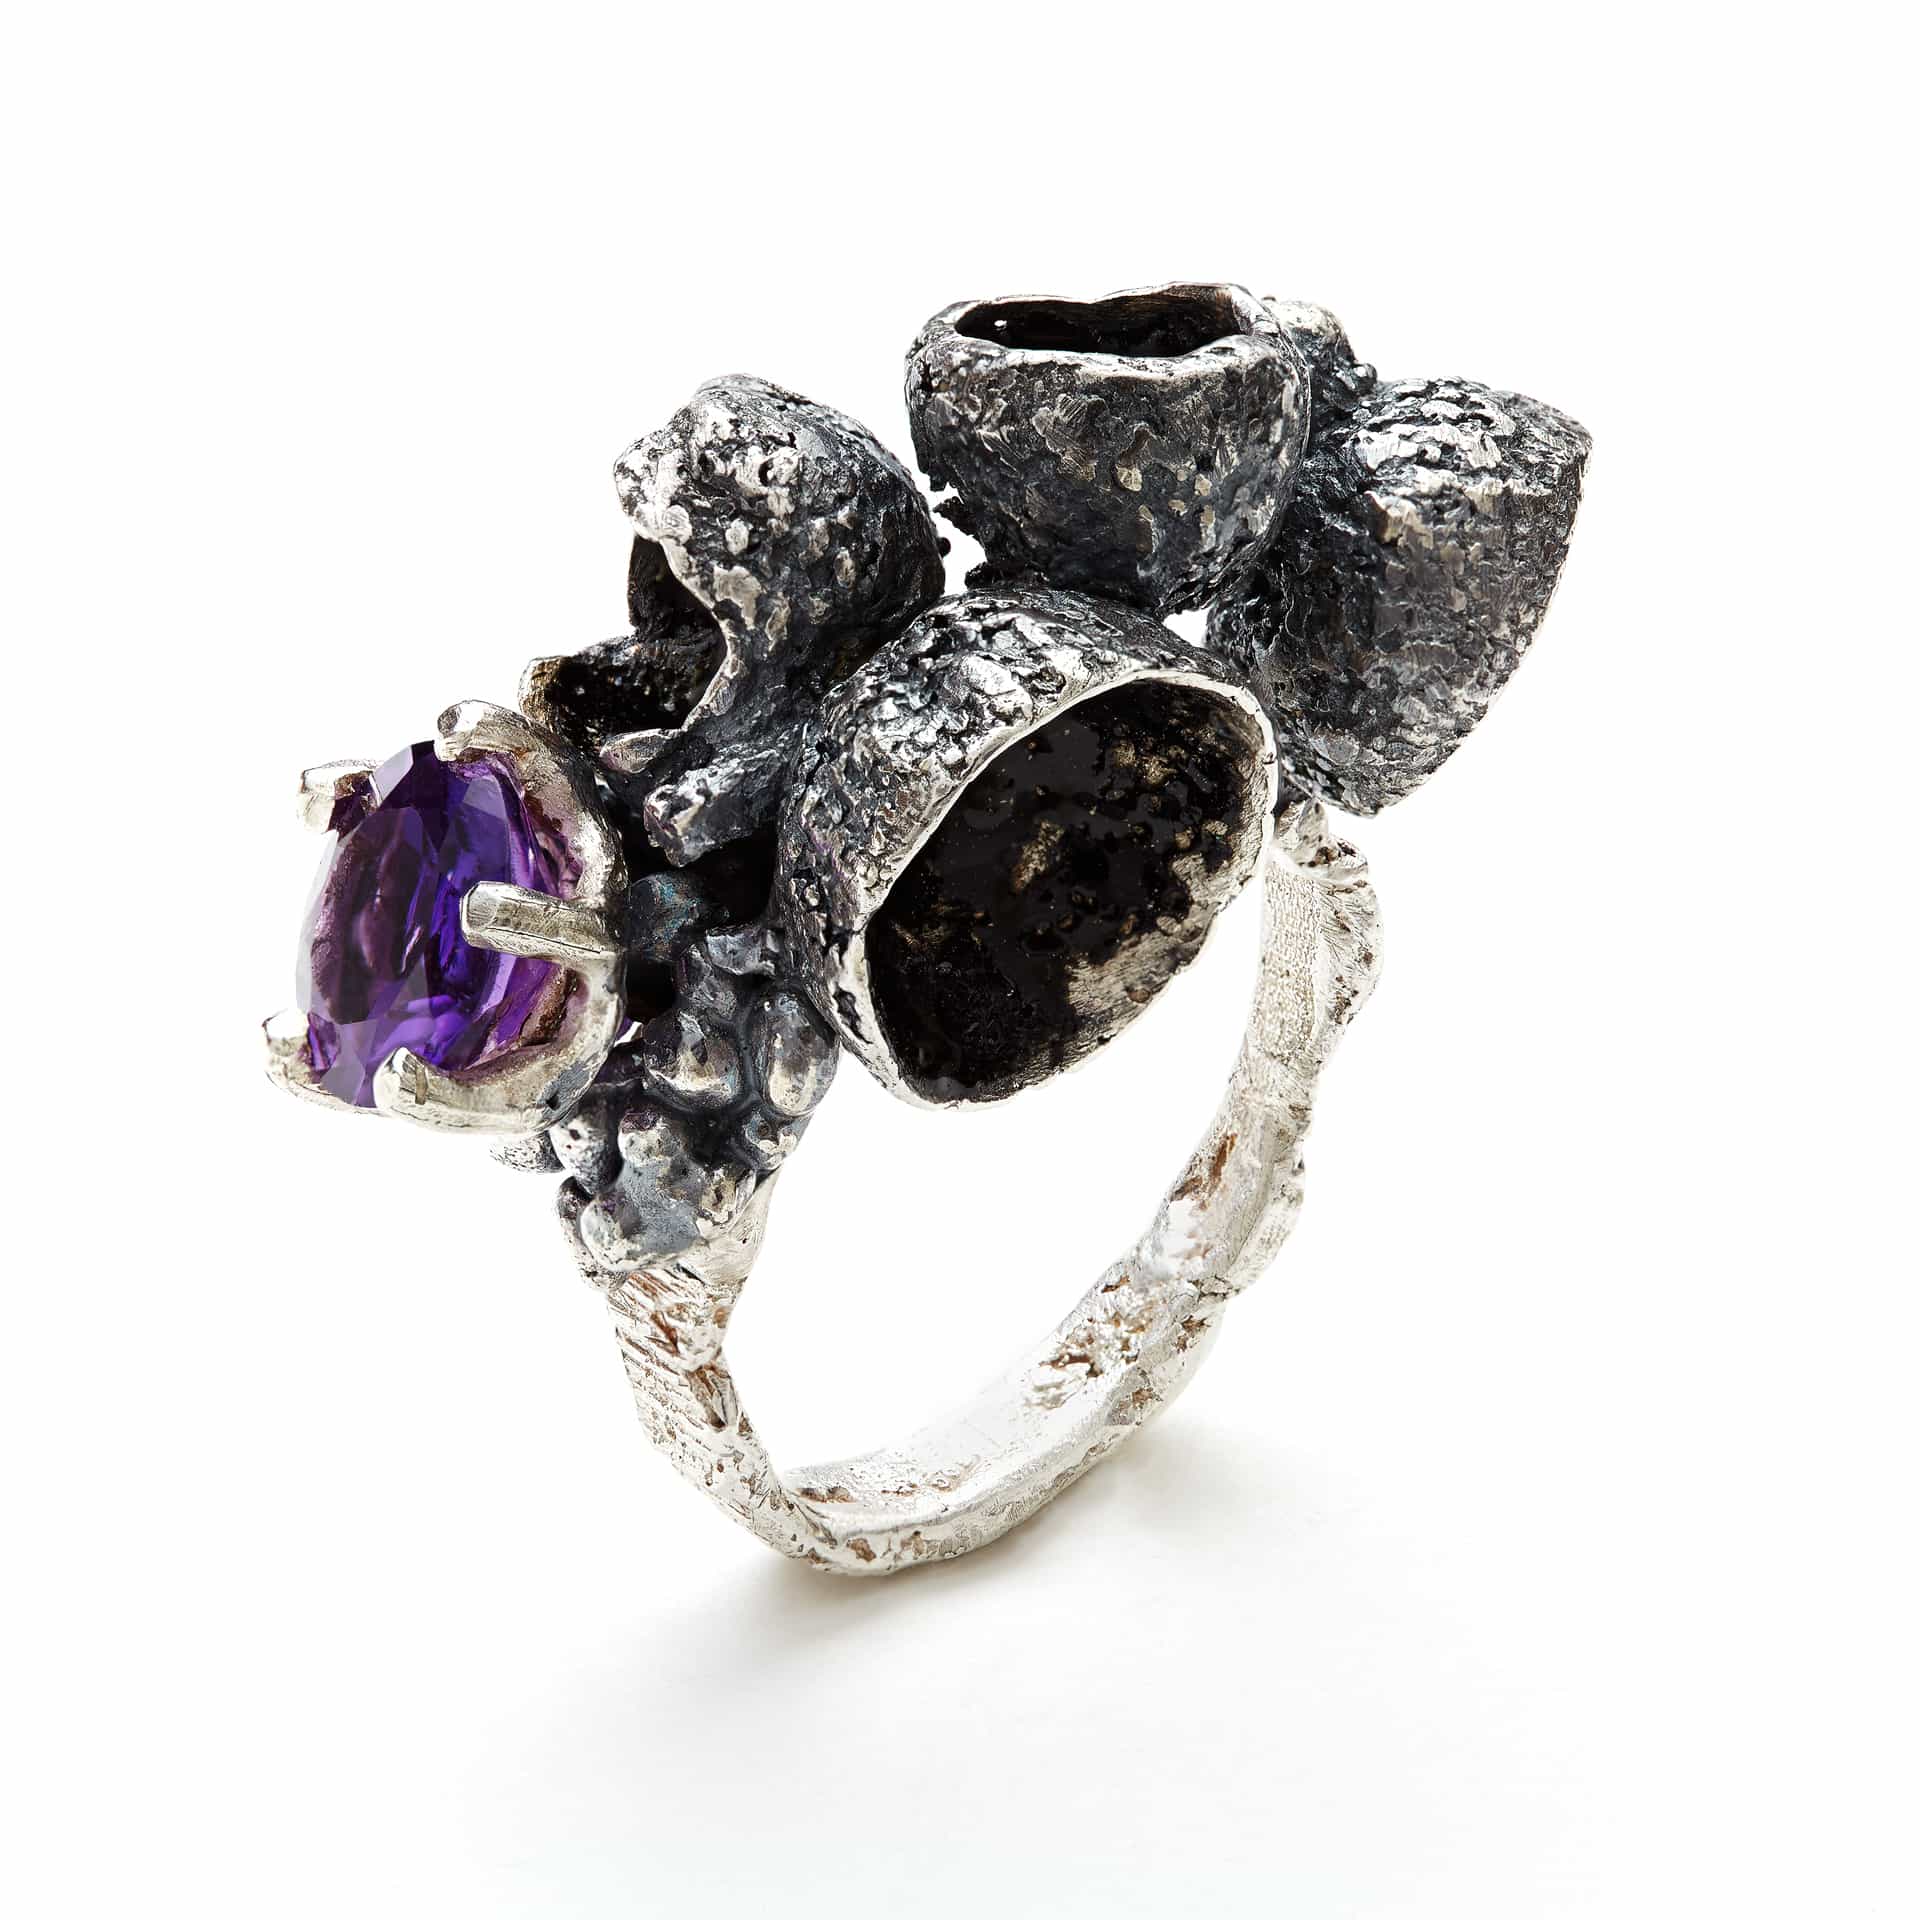 orgnaic_ring_eily_o_connell_irish_jewellery_jewelry_art_amethyst_silver_enamel_unique_contemporary